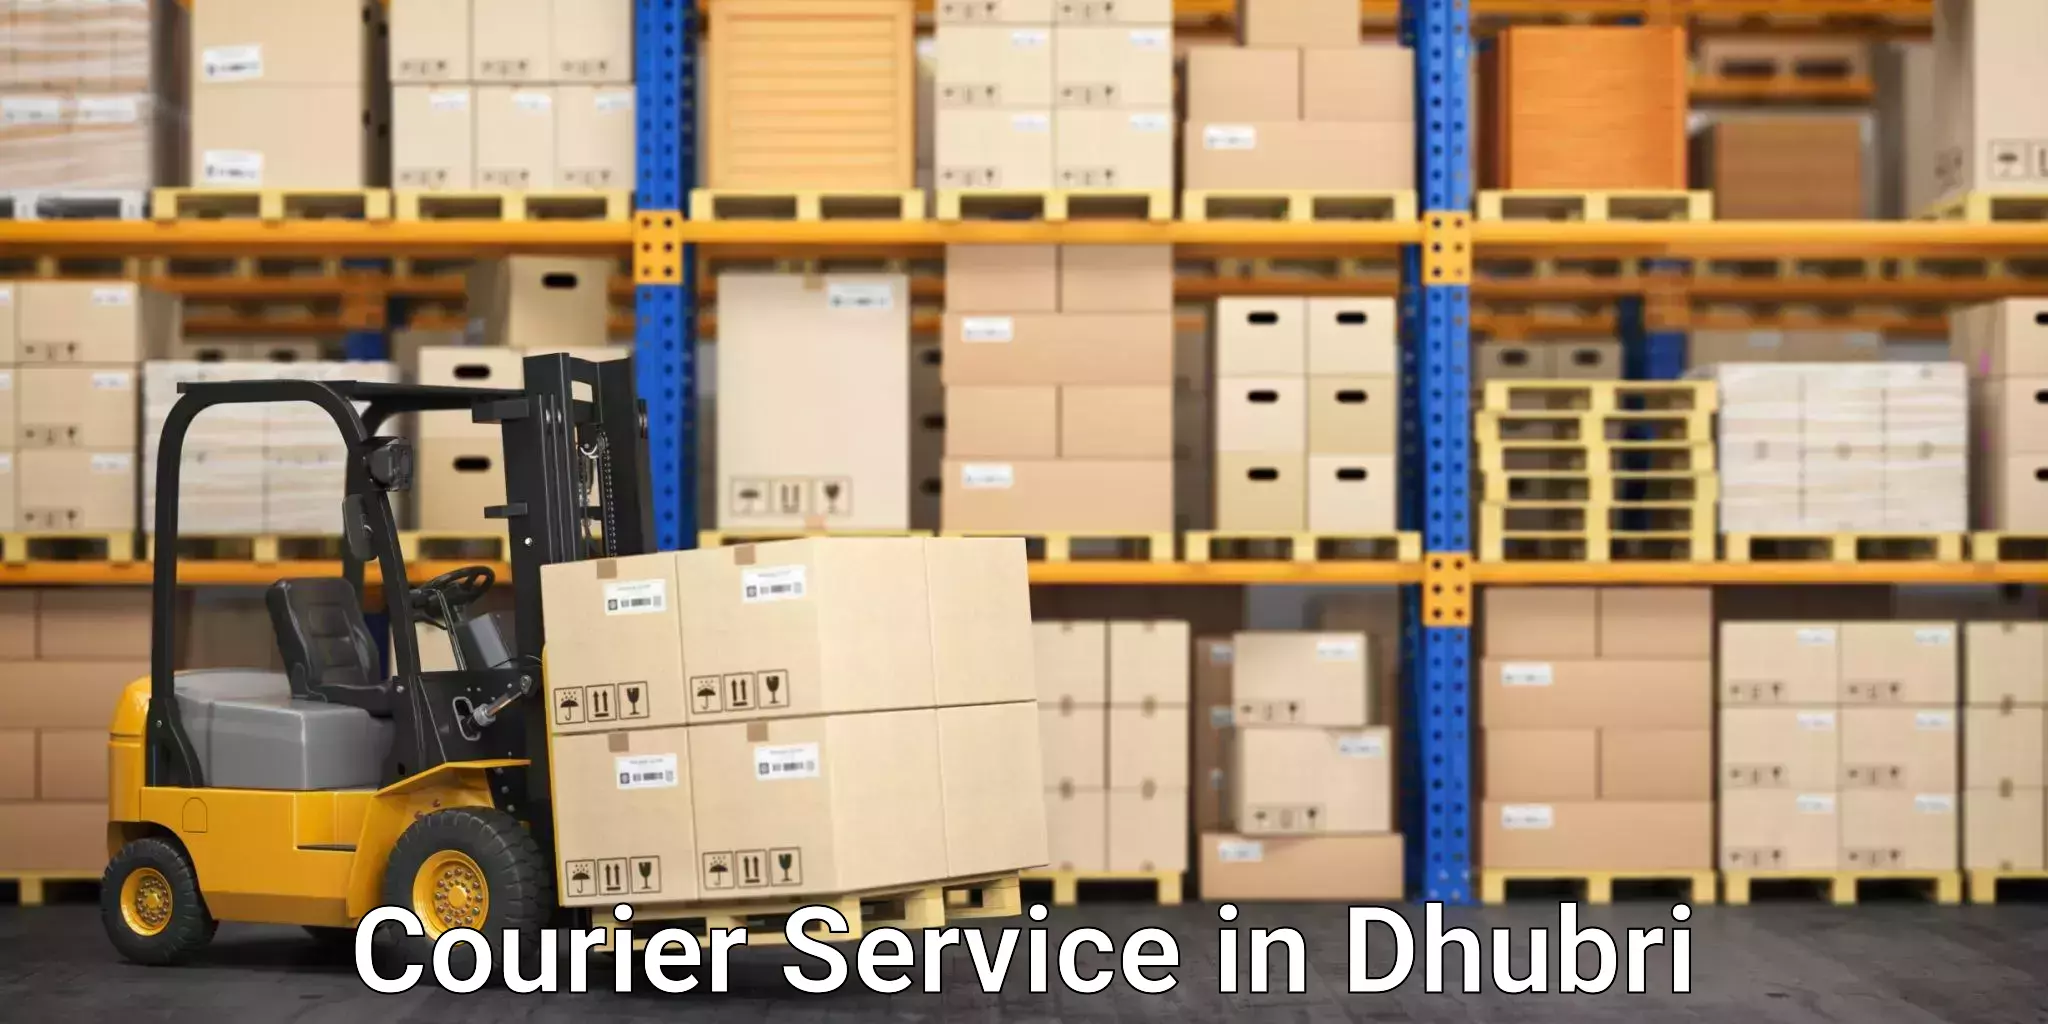 Streamlined delivery processes in Dhubri